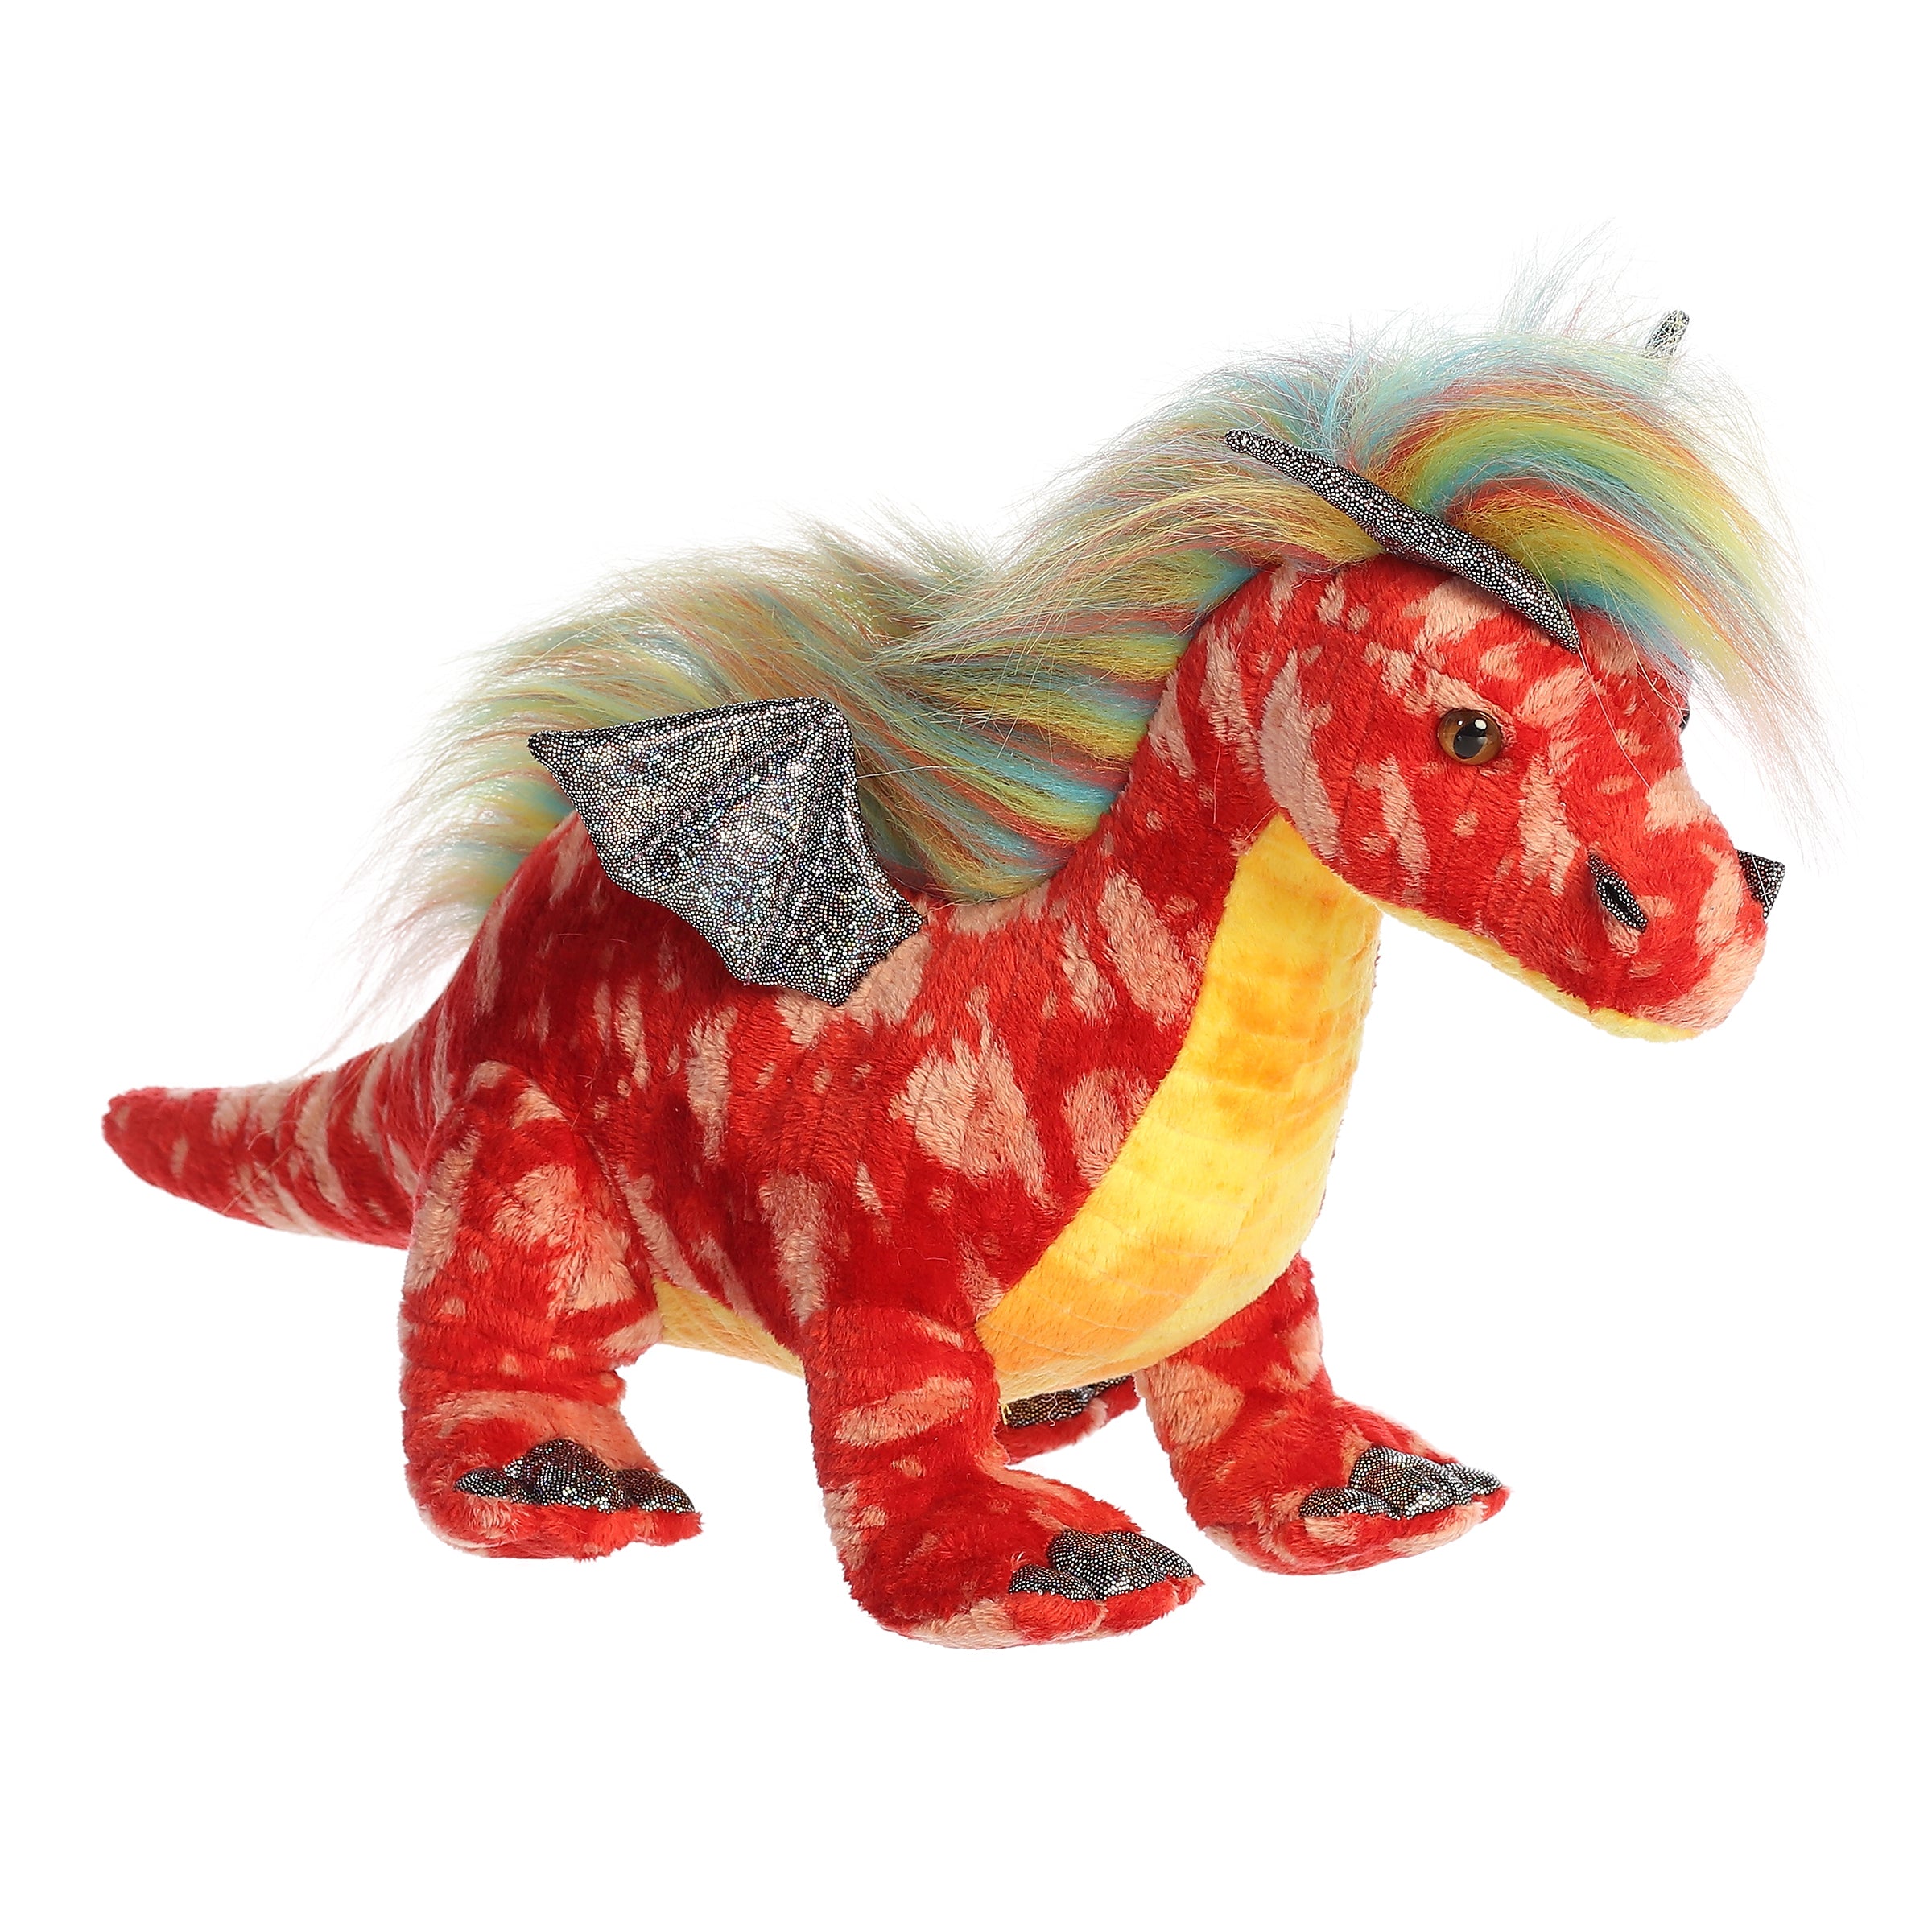 An enchanted dragon stuffed animal plush with a red body, yellow belly, and wild rainbow hair all along its spine.